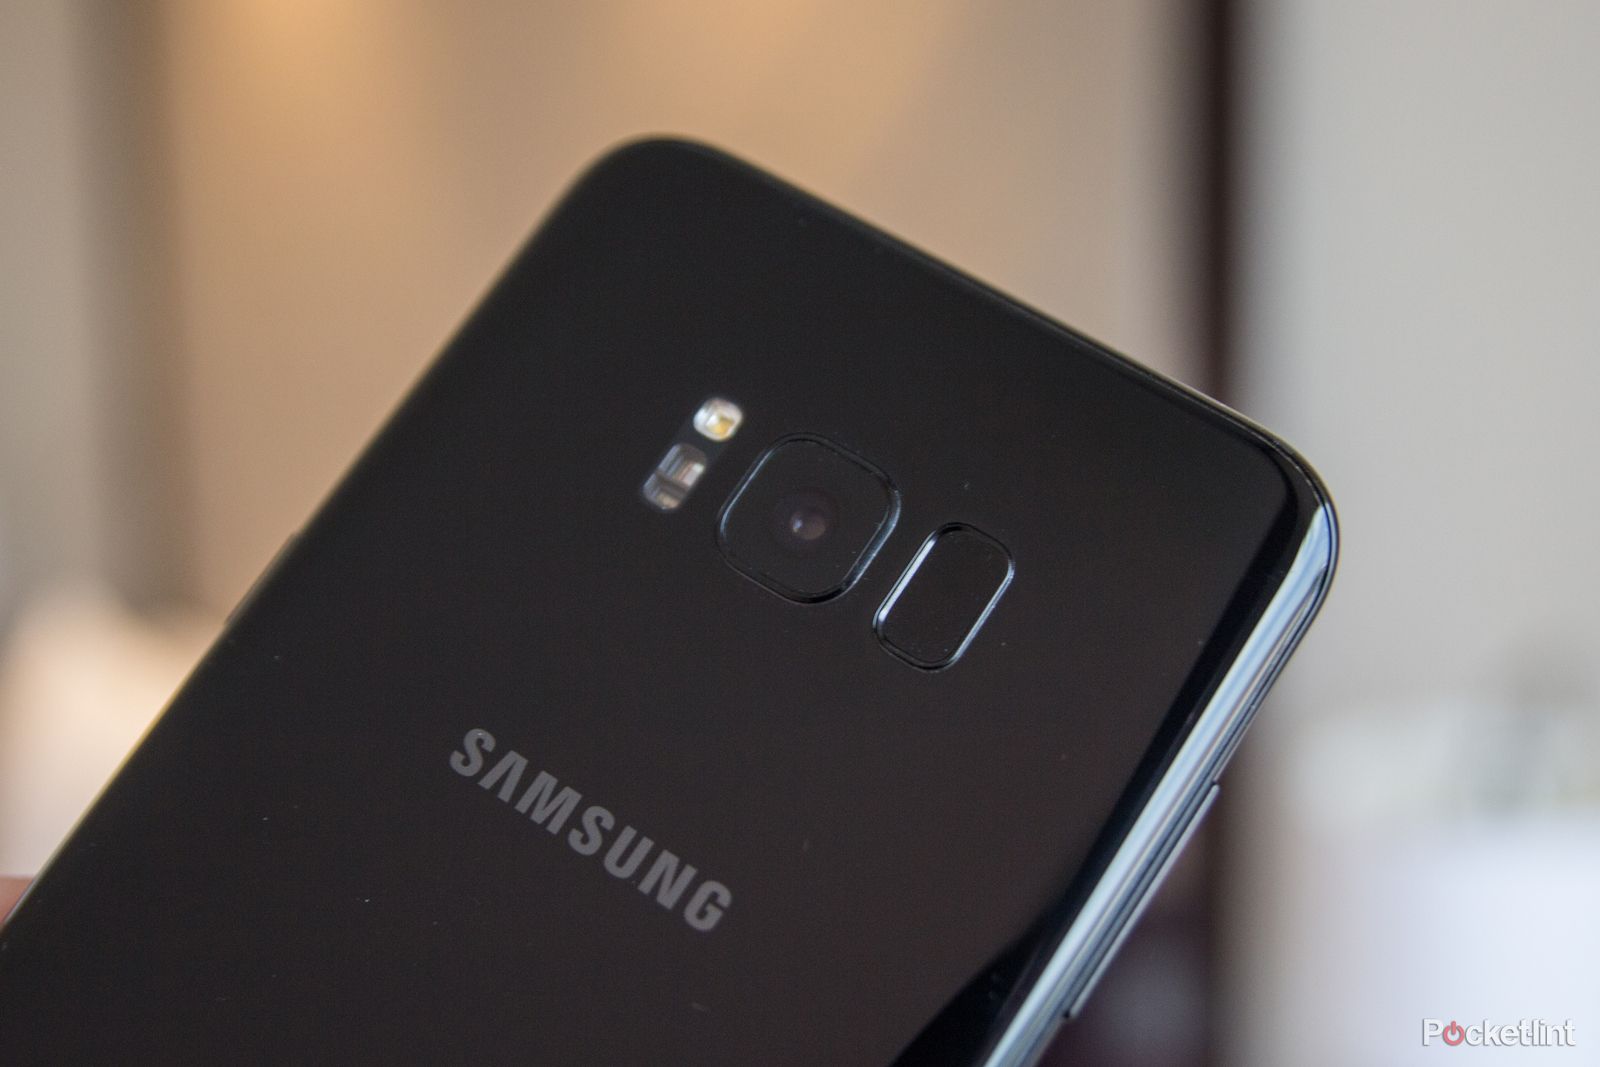 Samsung Galaxy S9 box reveals specs of the upcoming flagship image 1